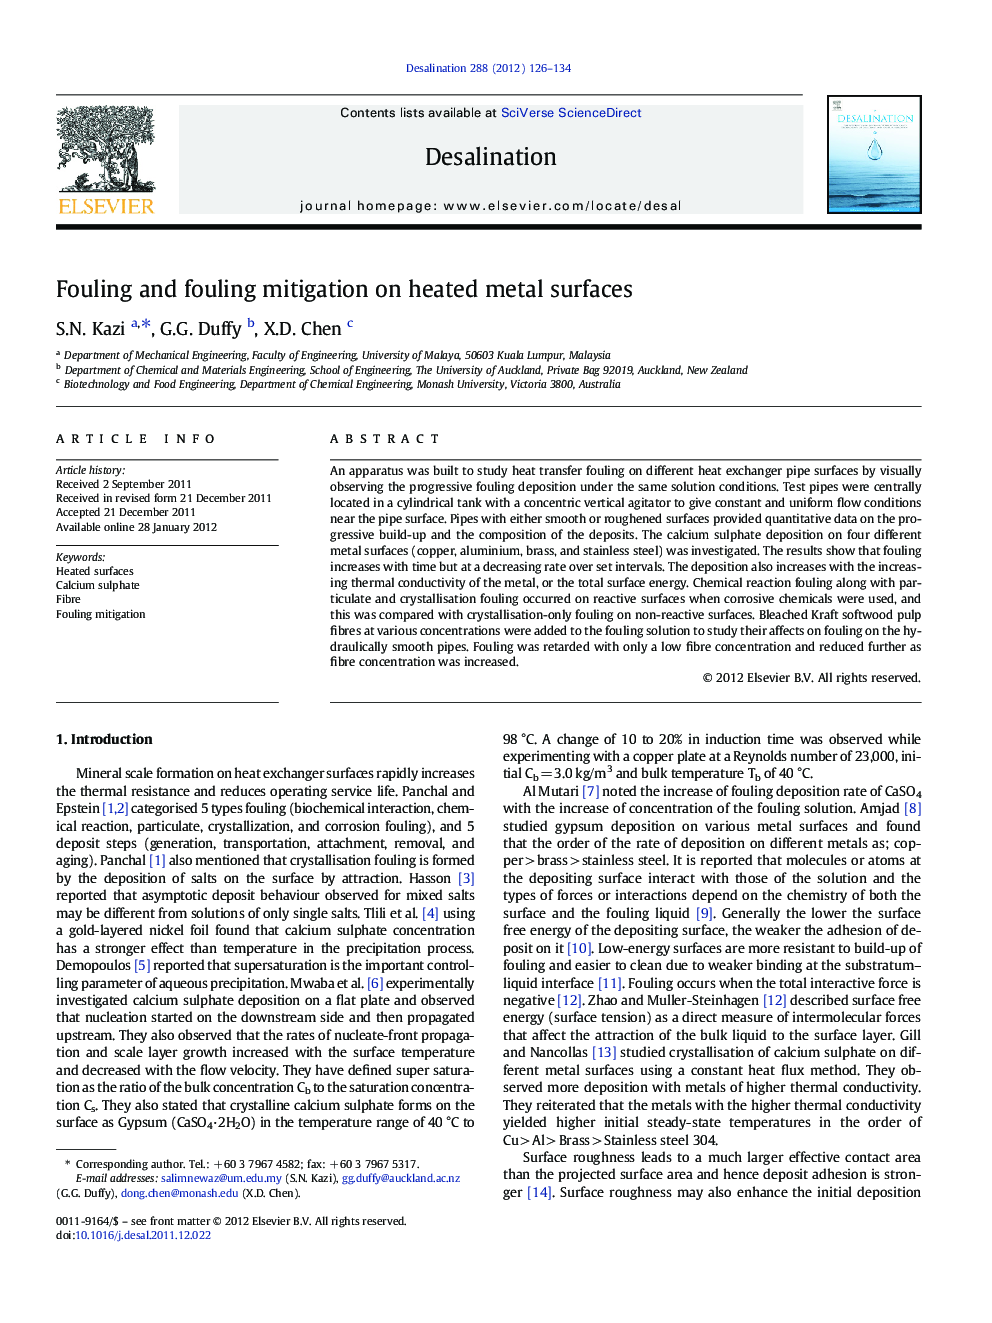 Fouling and fouling mitigation on heated metal surfaces